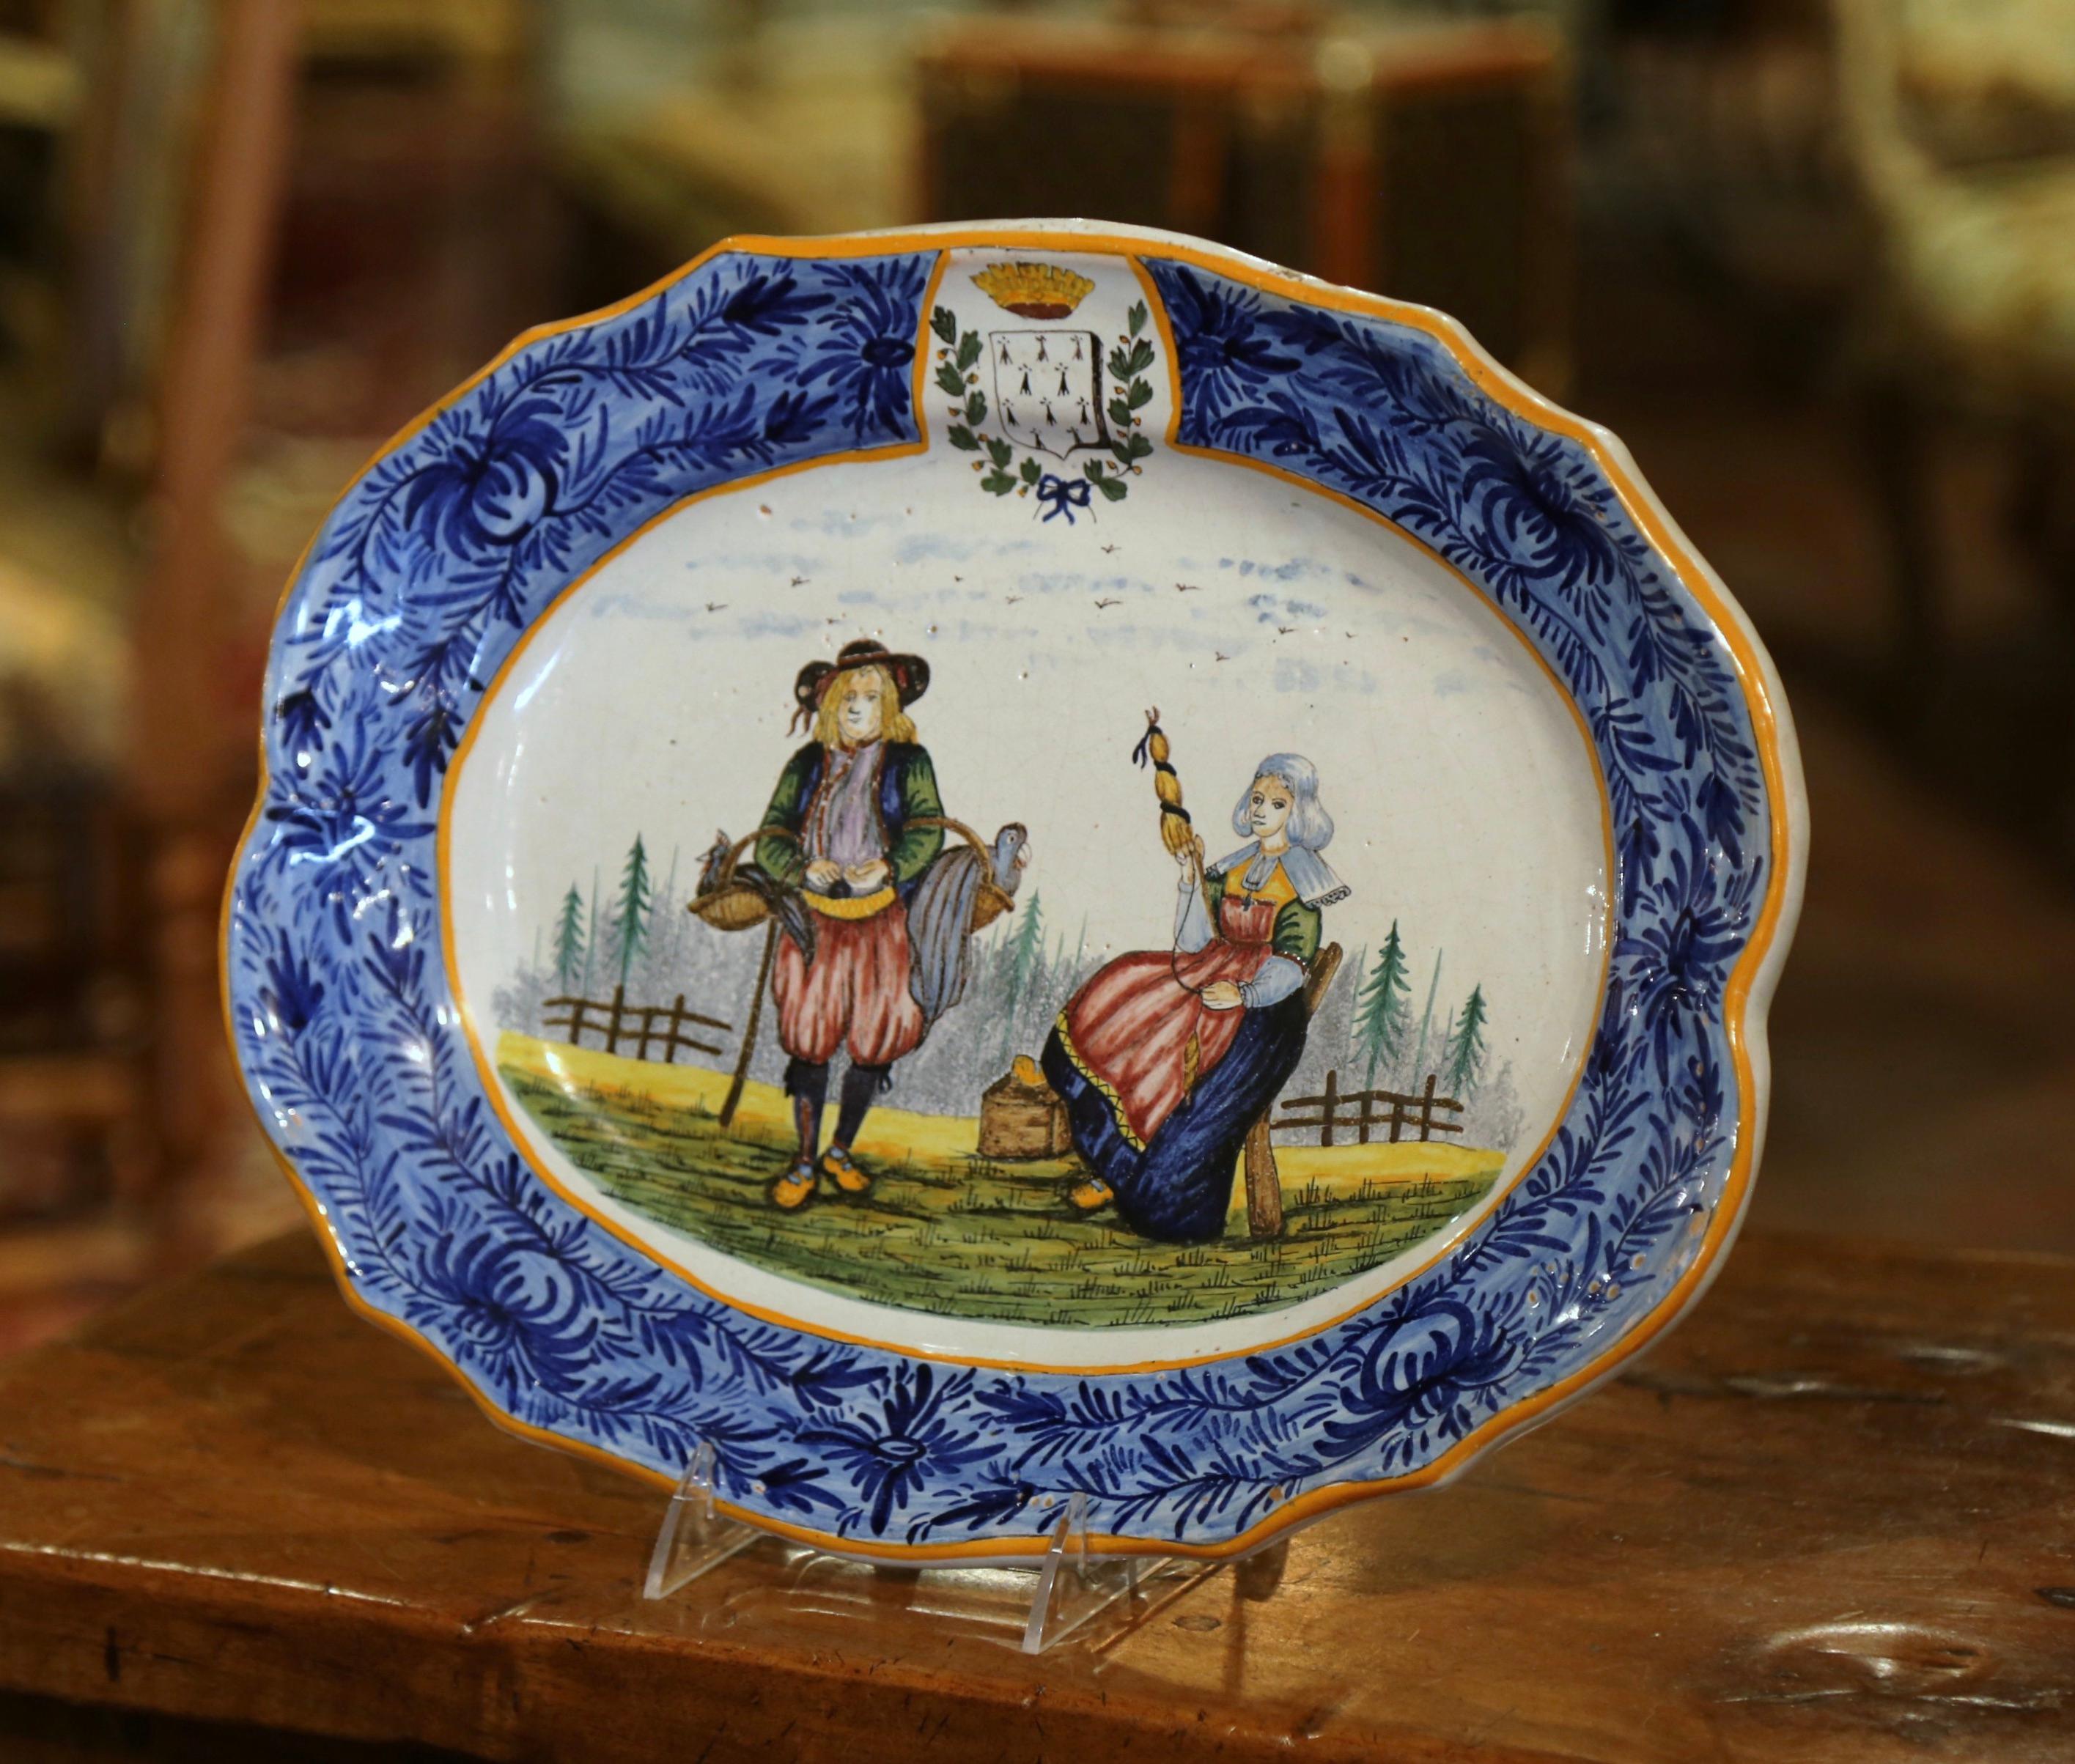 Decorate a wall or a shelf with this colorful antique platter. Created in Brittany, France circa 1895, the large hand painted ceramic plate depicts a Breton couple in traditional costumes. The oval, porcelain platter with scalloped edges, is further